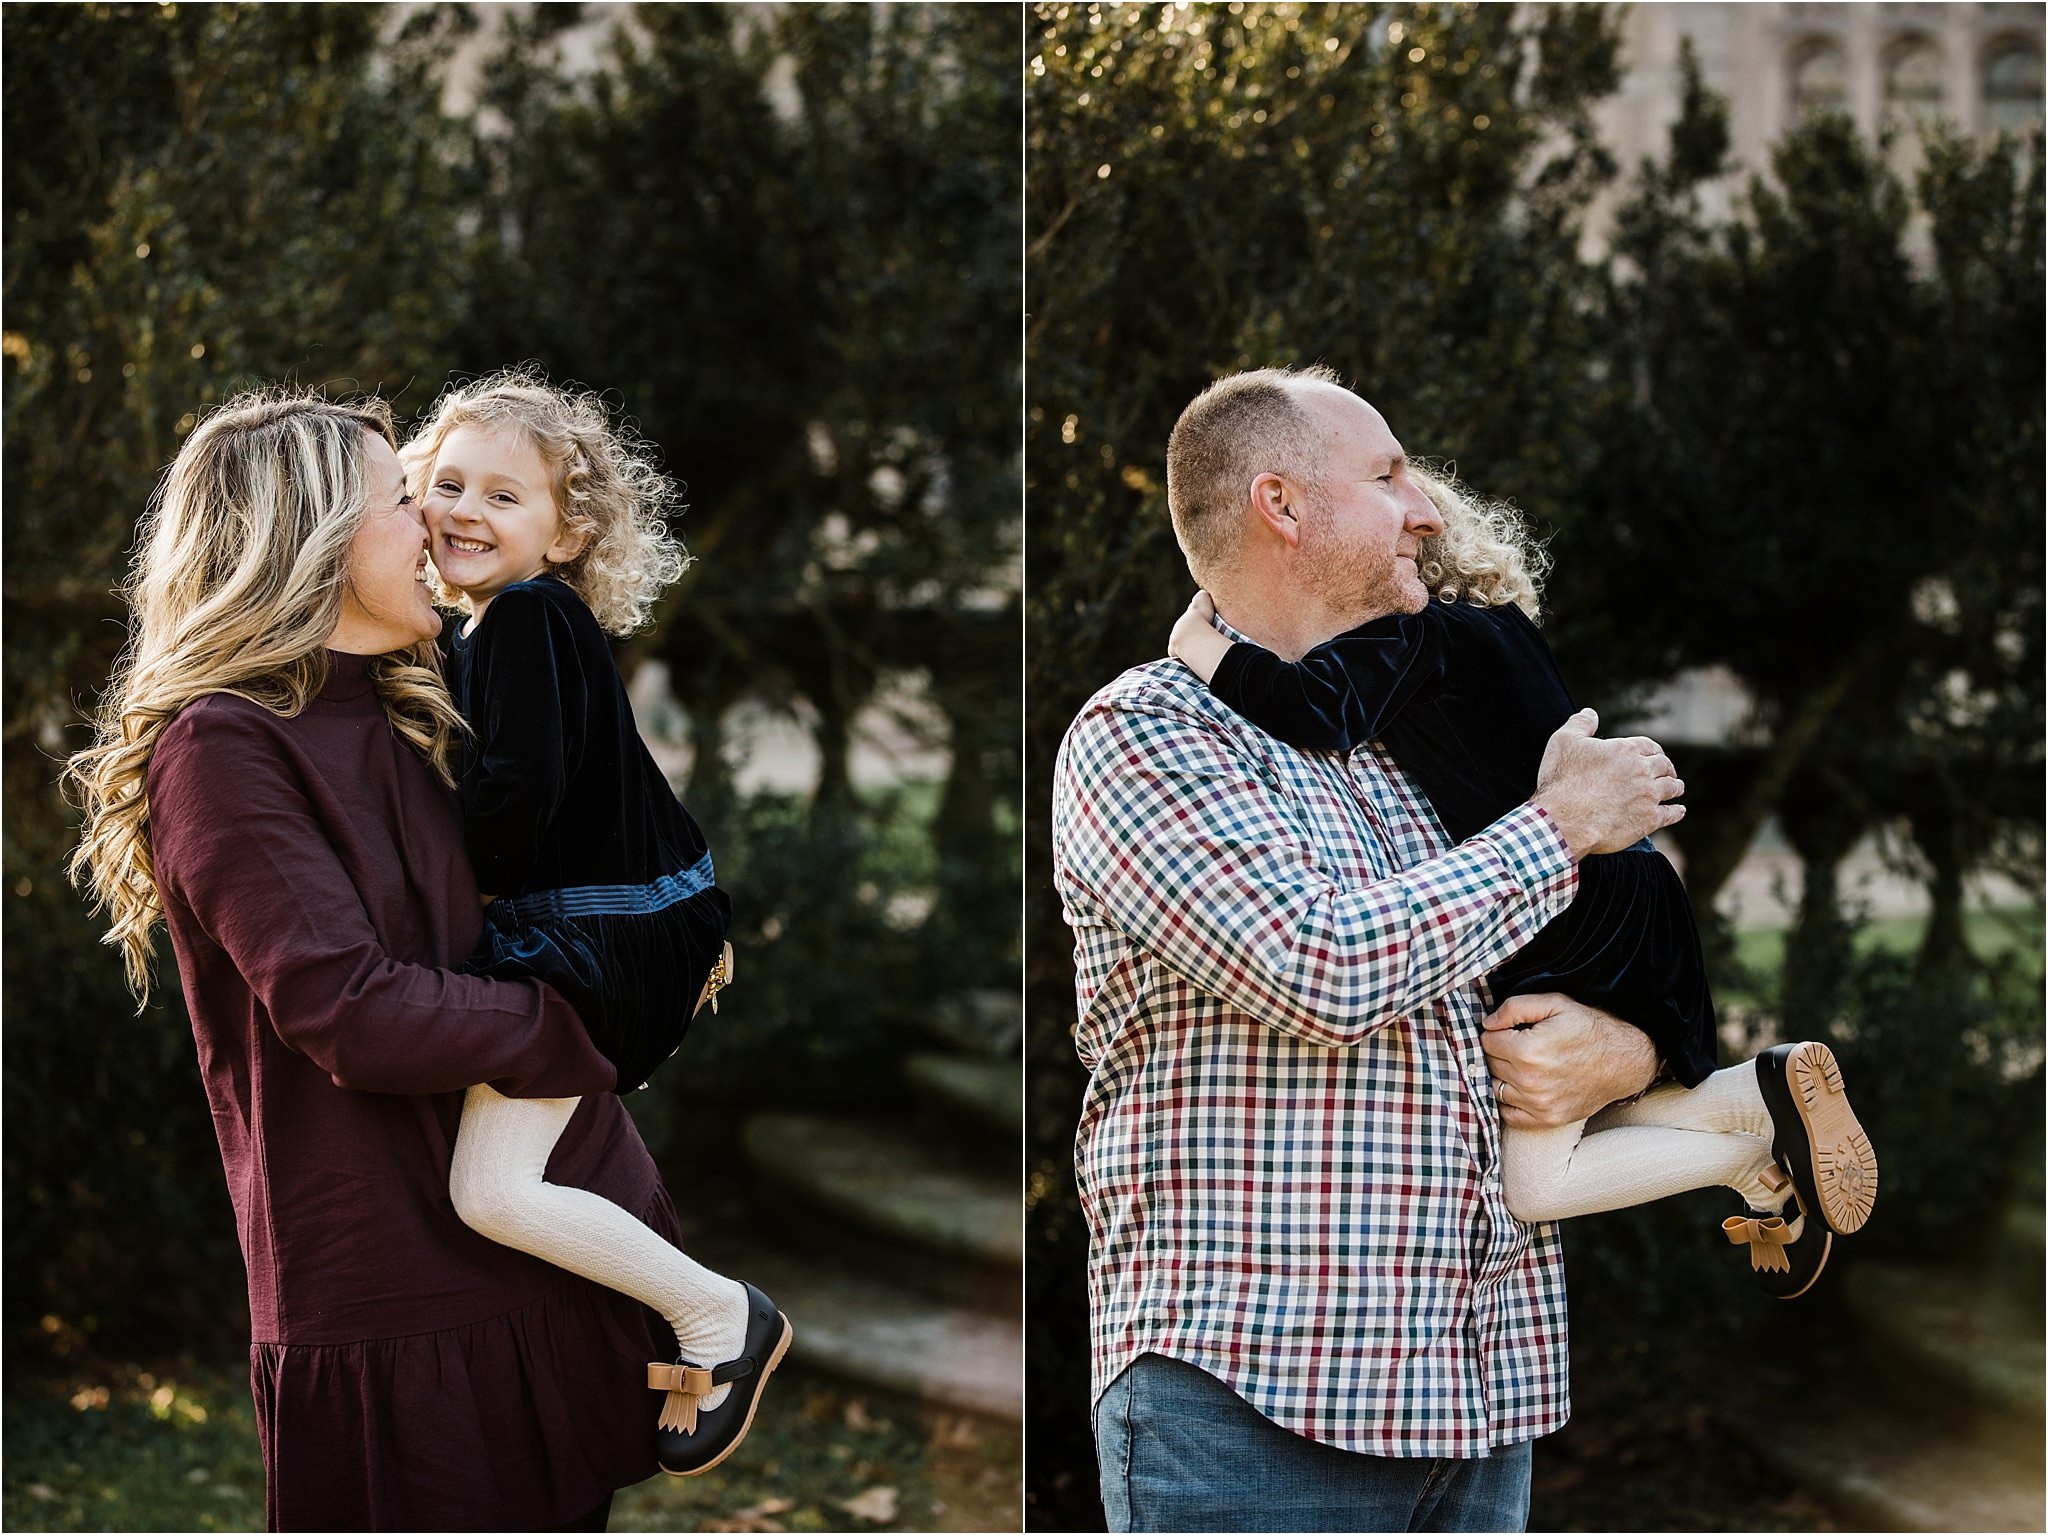 Natural, laid back and fun family photos at Hartwood Acres in Pittsburgh